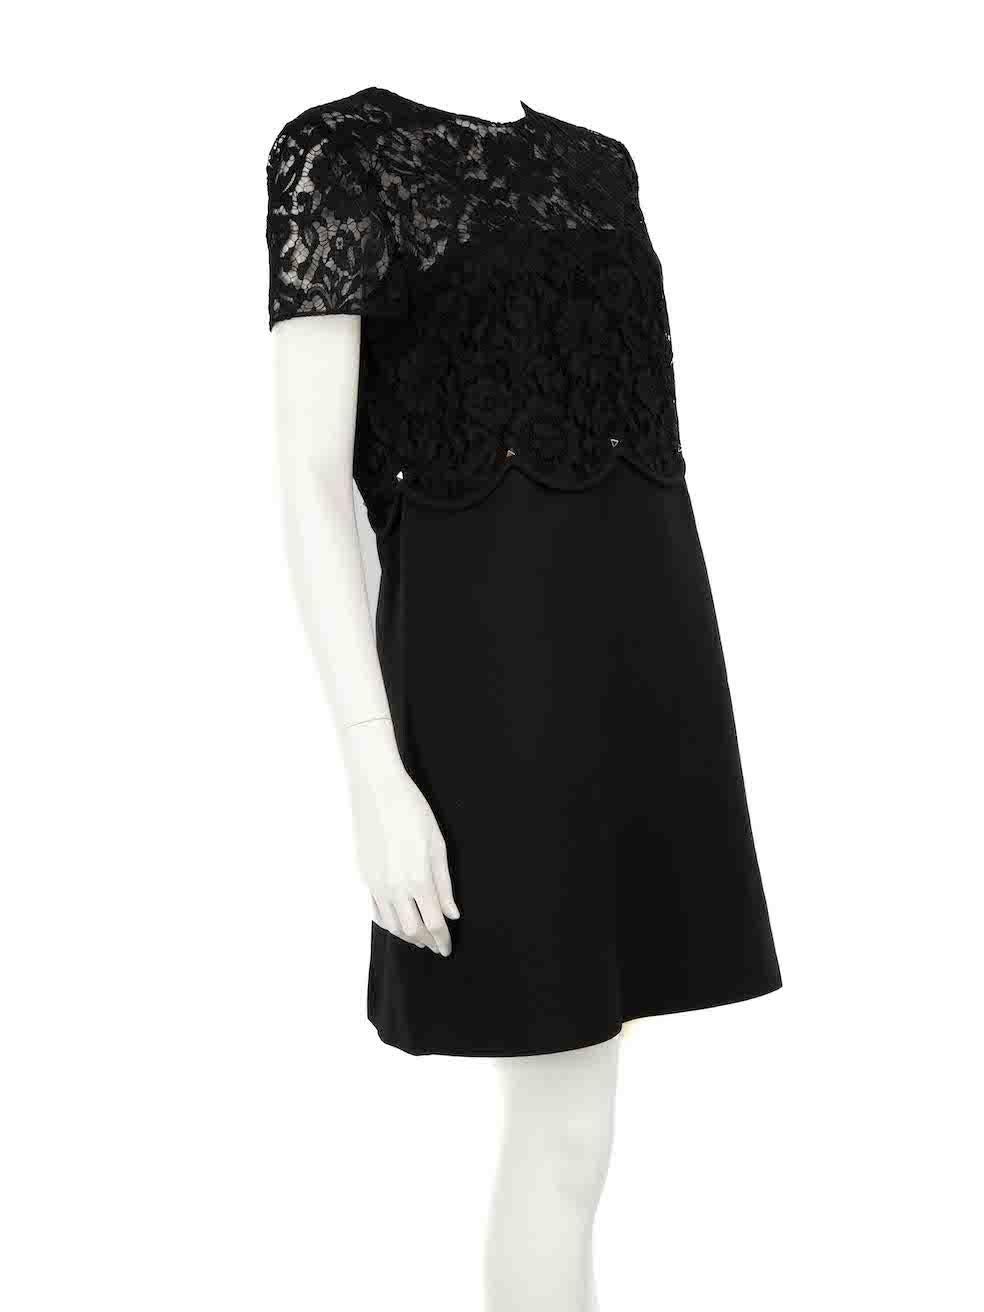 CONDITION is Very good. Hardly any visible wear to dress is evident on this used Valentino designer resale item.
 
 
 
 Details
 
 
 Black
 
 Wool
 
 Dress
 
 Top lace sheer panel
 
 Rockstud accent
 
 Mini
 
 Round neck
 
 Short sleeves
 
 Back zip